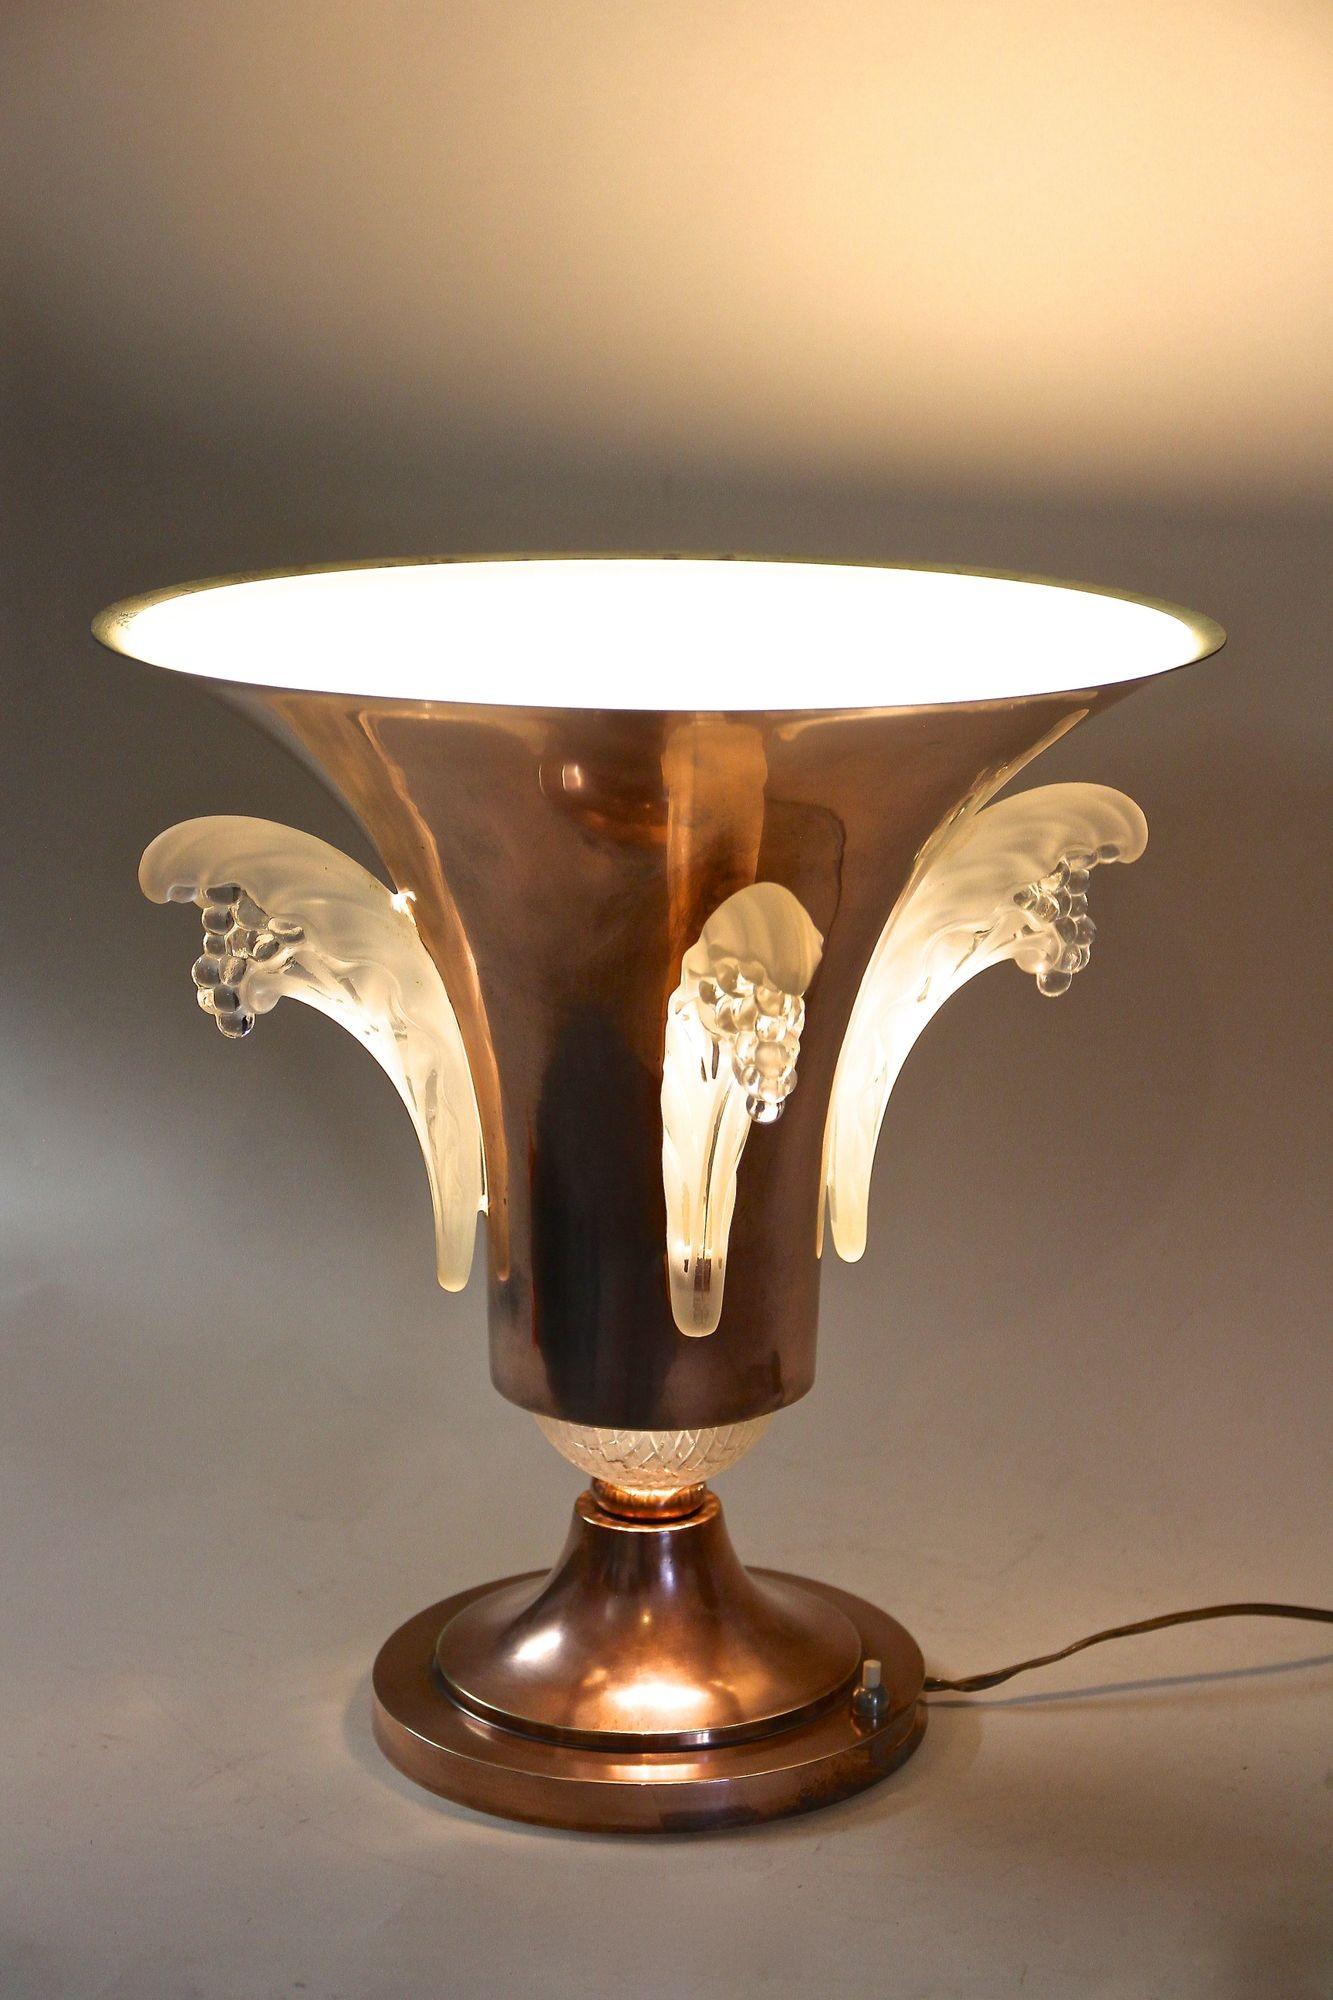 Art Deco Copper Table Lamp with Lalique Glass Elements, France, circa 1925 For Sale 3